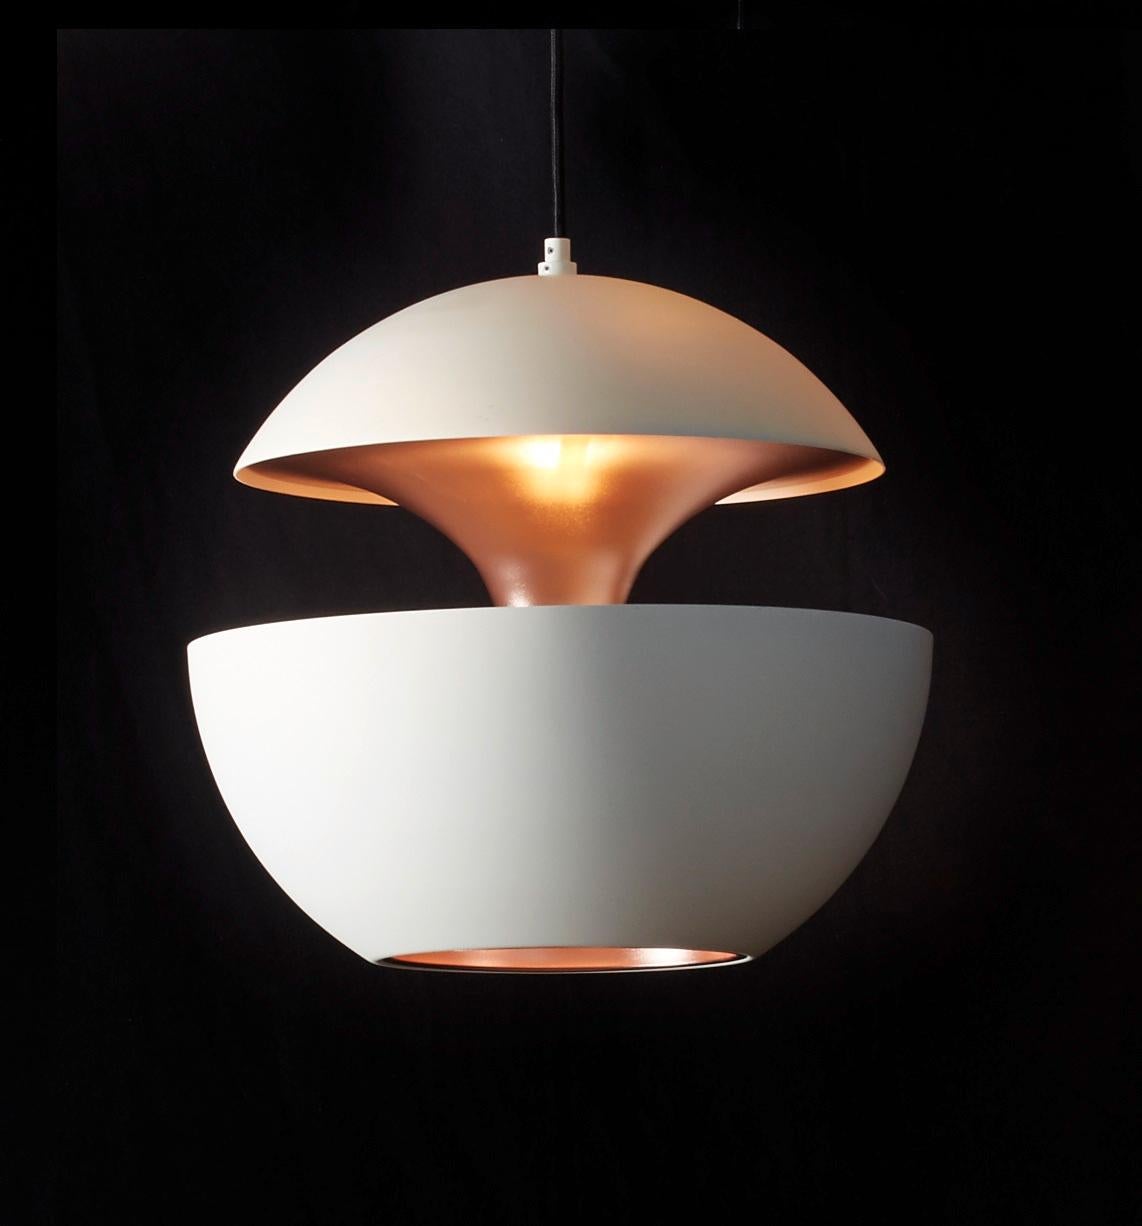 Here comes the sun extra large white and copper pendant lamp by Bertrand Balas
Dimensions: D 45 x H 45 cm
Materials: Aluminum
Available in different sizes and colors

All our lamps can be wired according to each country. If sold to the USA it